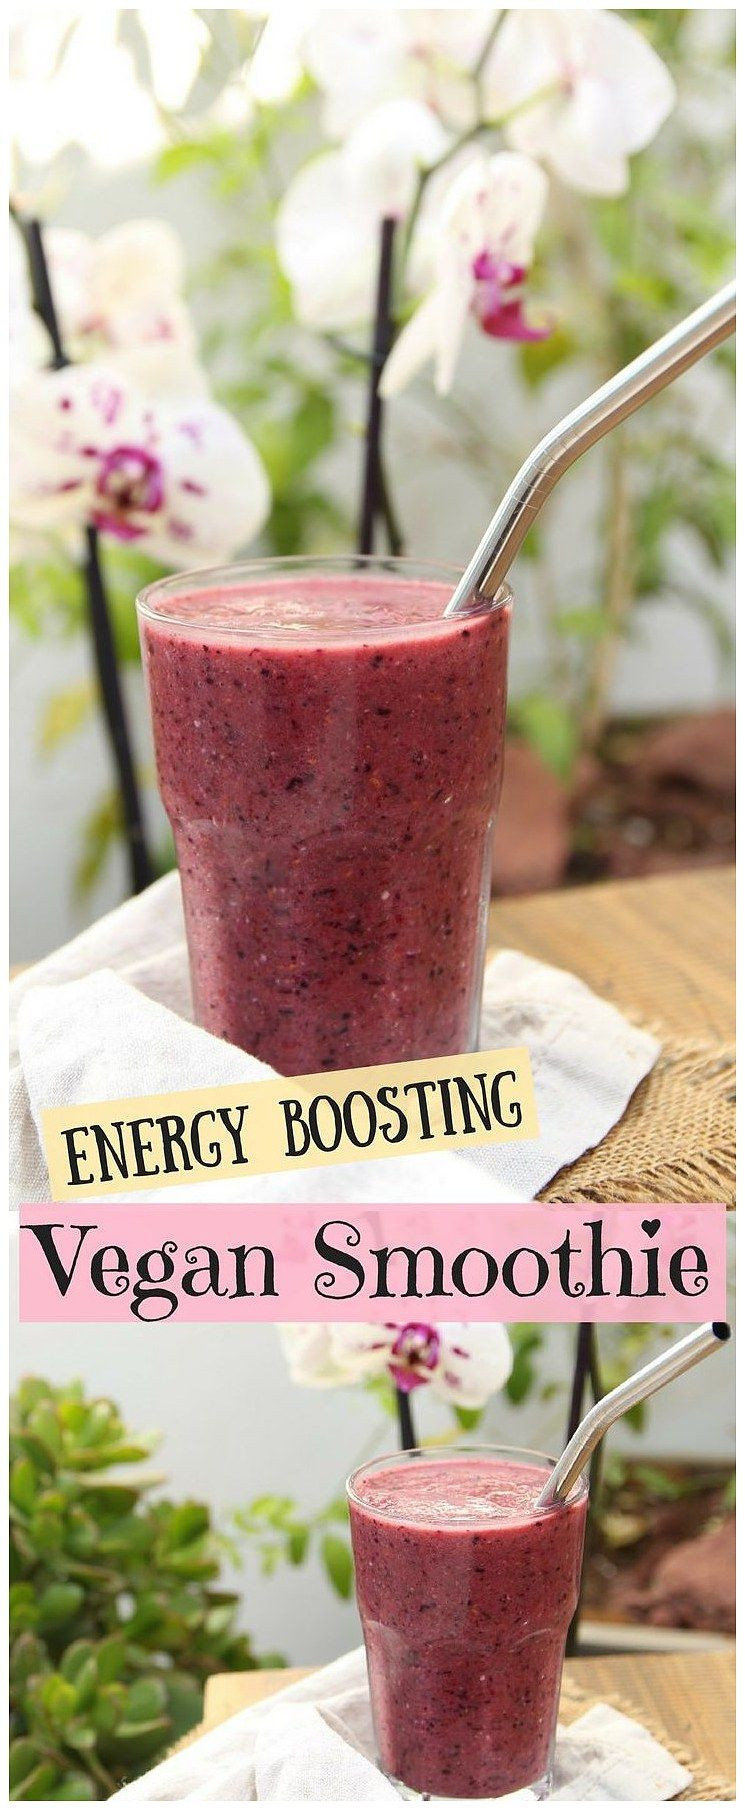 High Fiber Smoothie Recipes Weight Loss
 Best Reasons to Add Smoothies to Your Diet With images